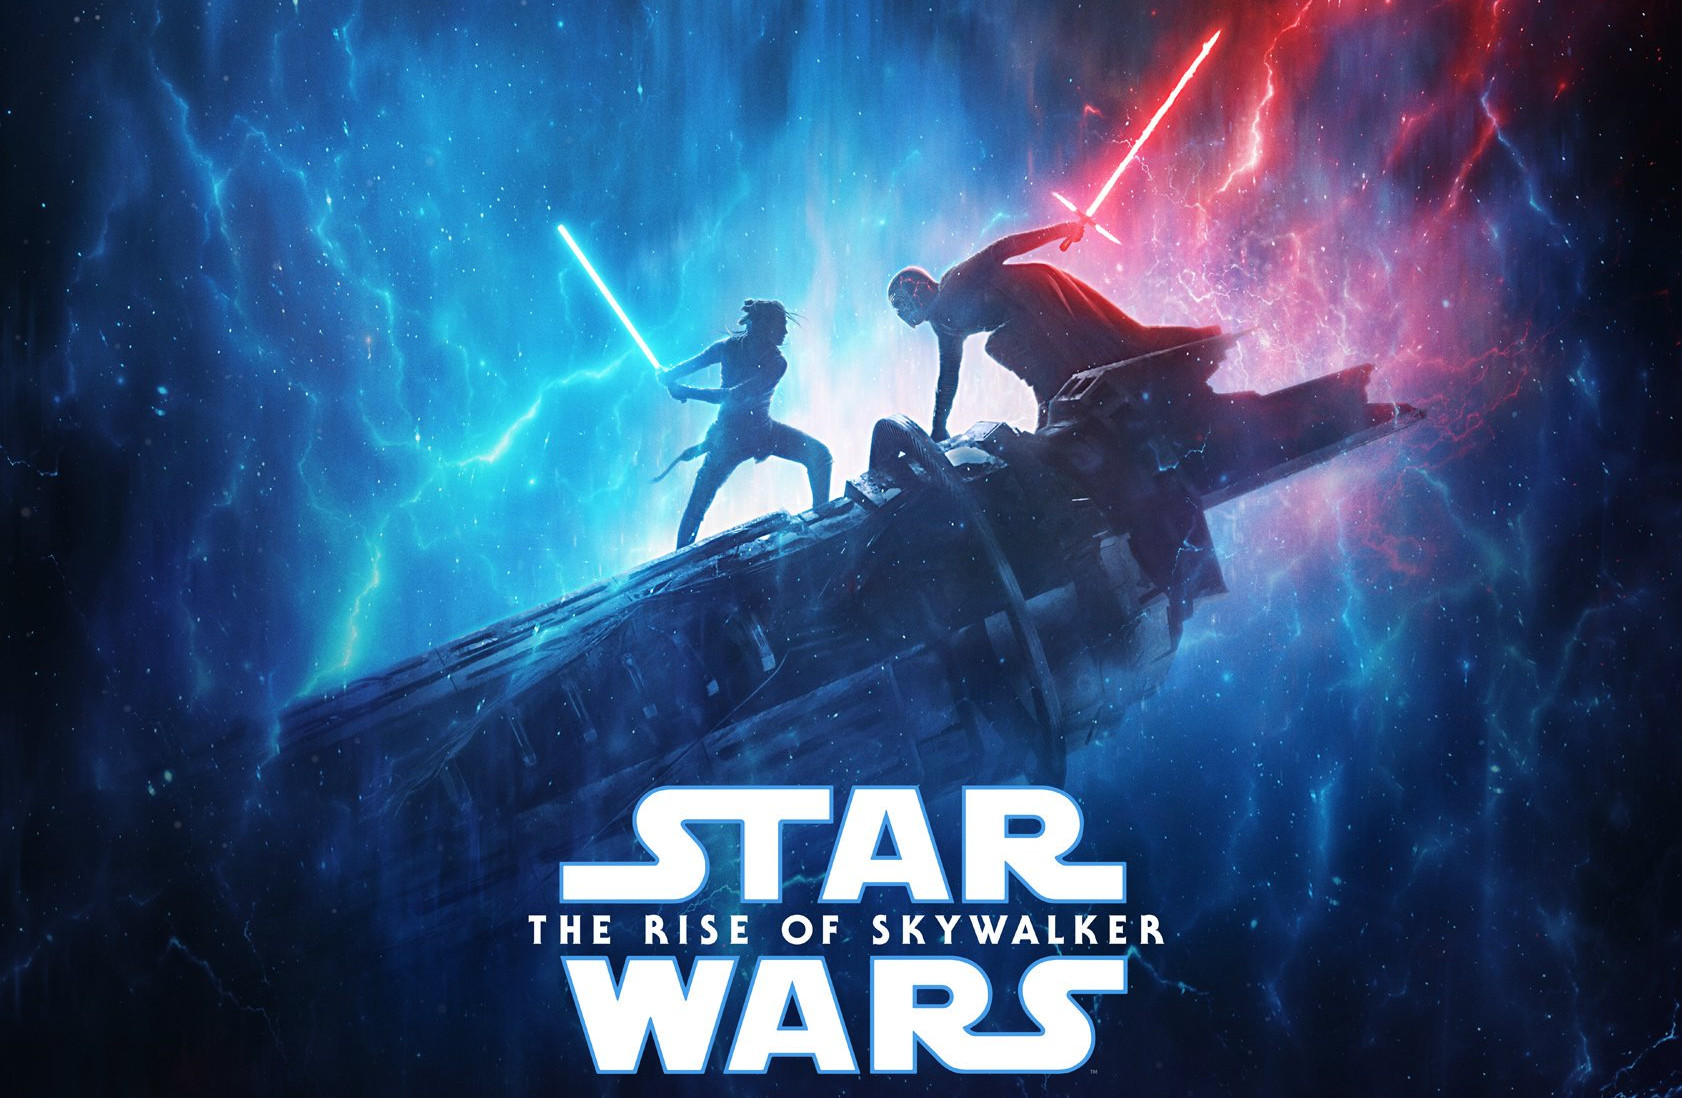 Star Wars Sizzle Reel From D23 To Be Released On Monday